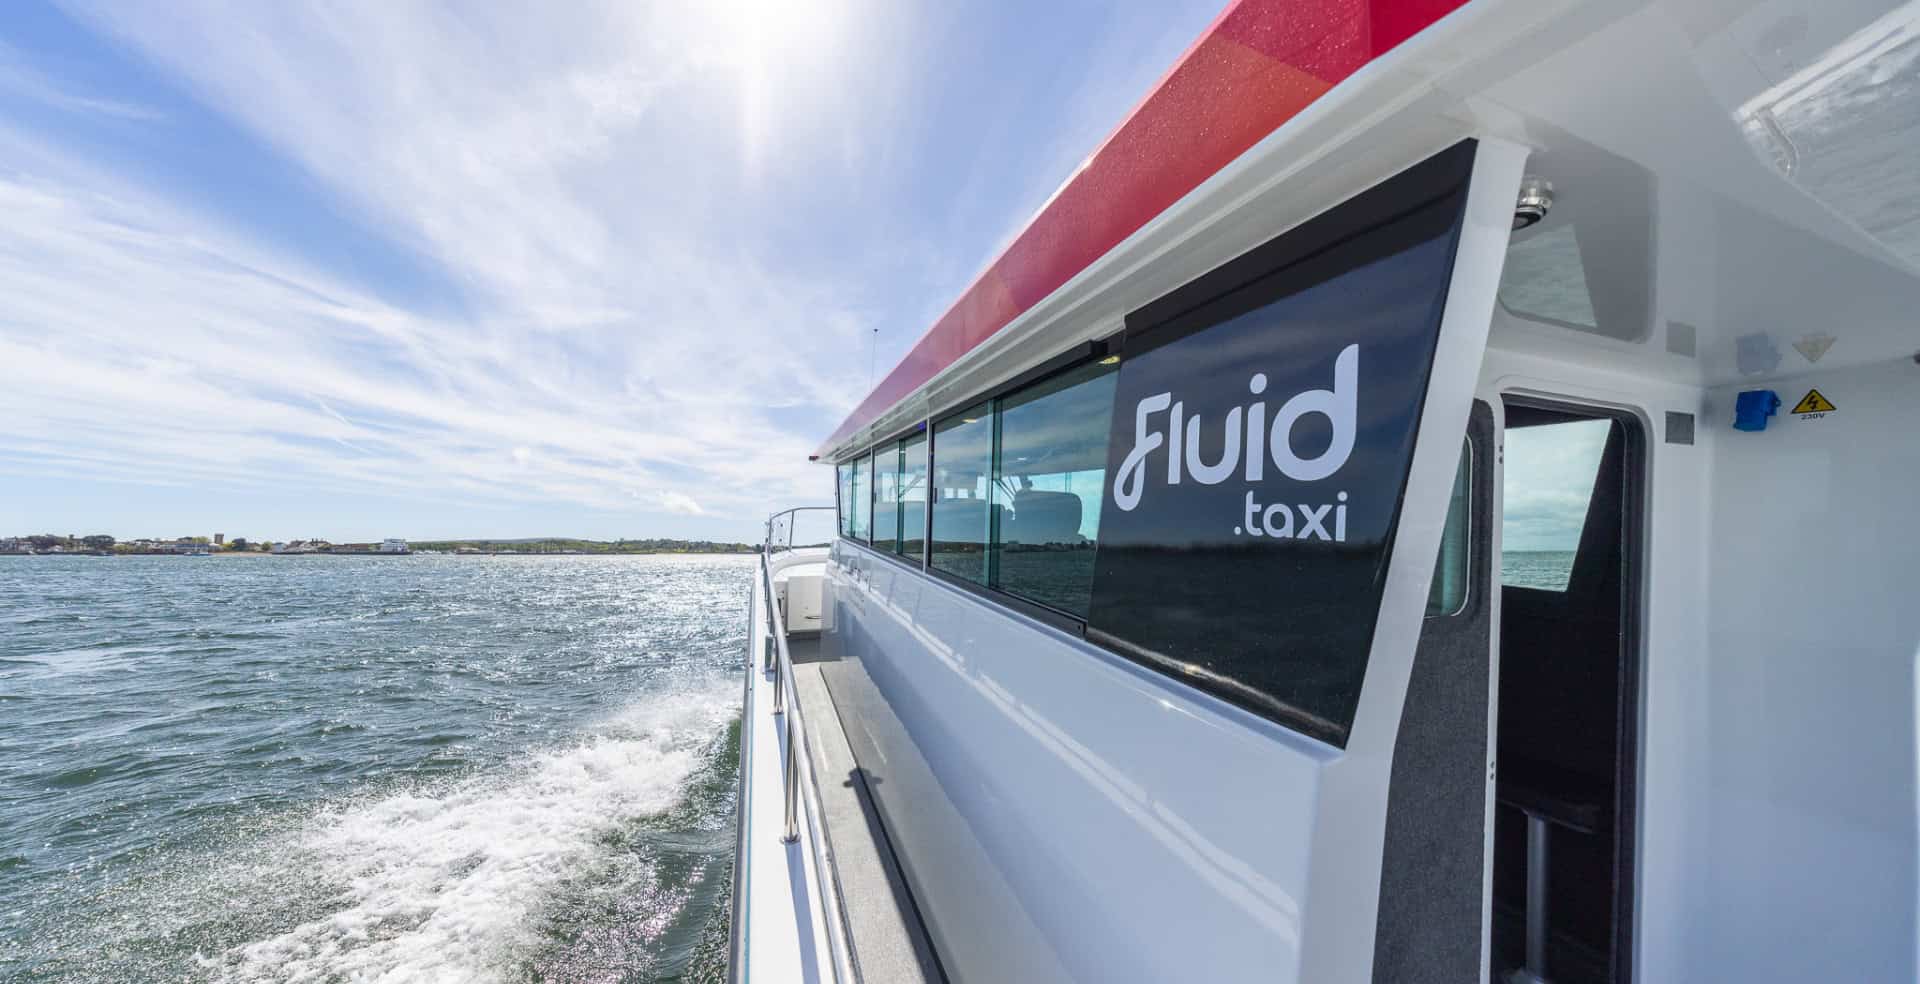 Fluid Taxi on the solent